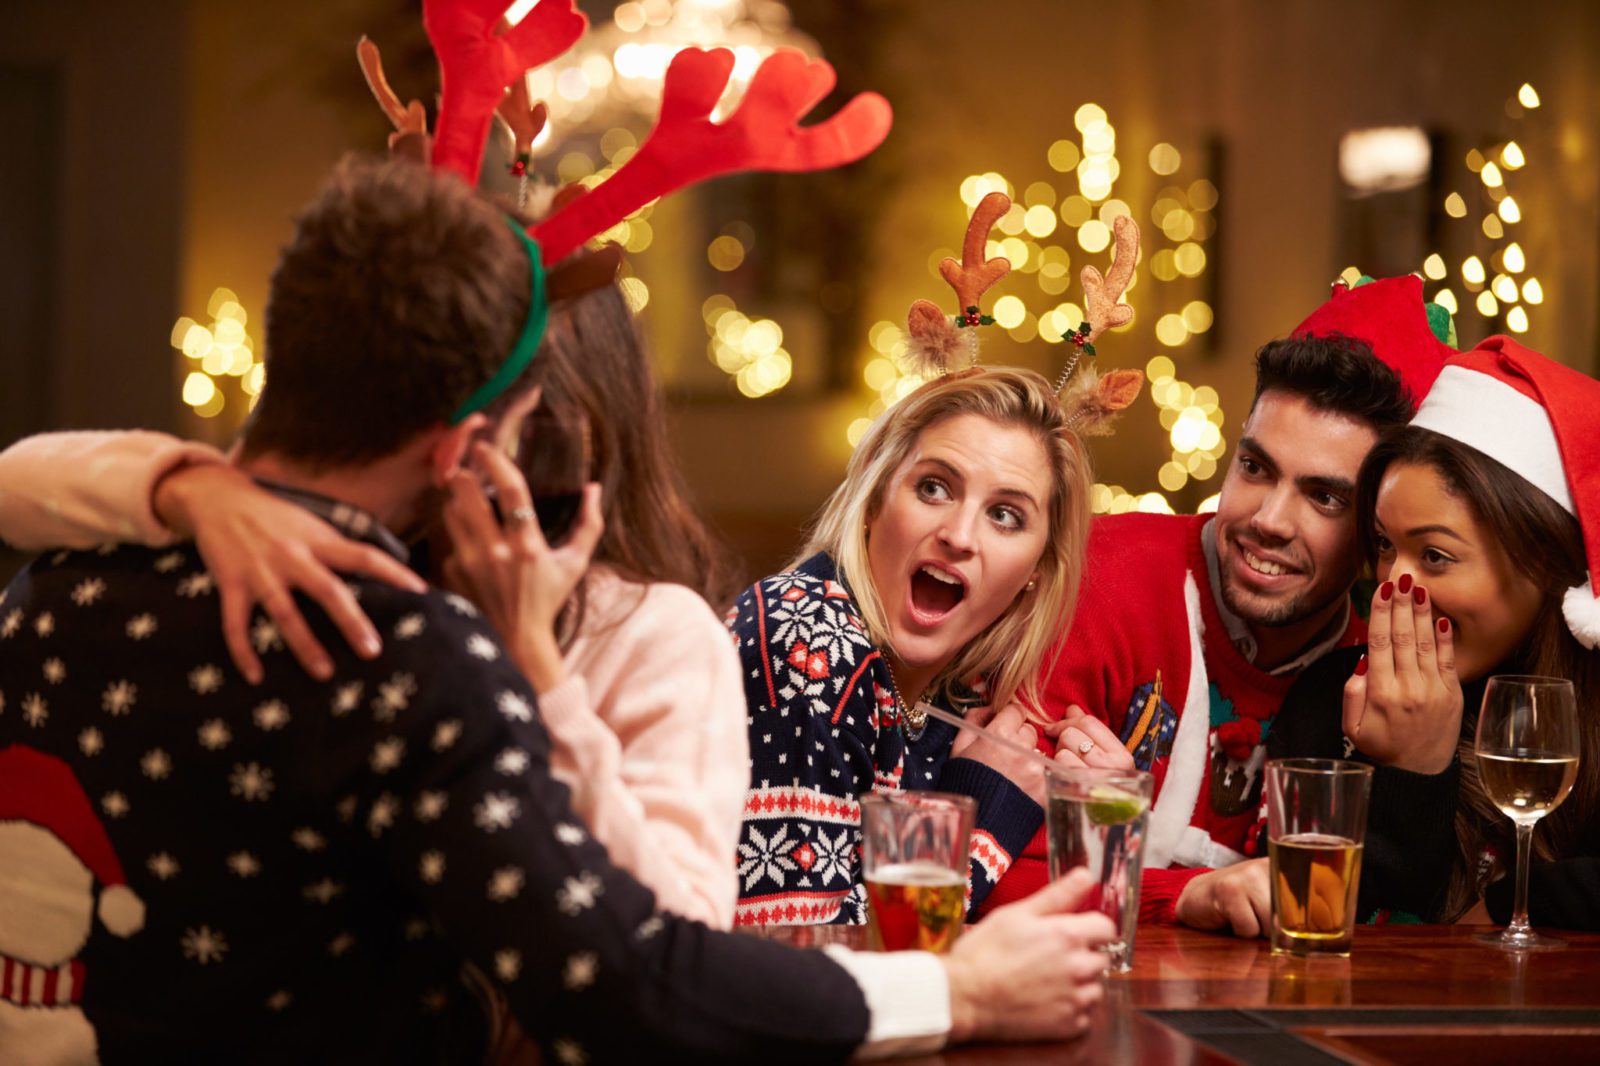 How to behave on your office Christmas party.